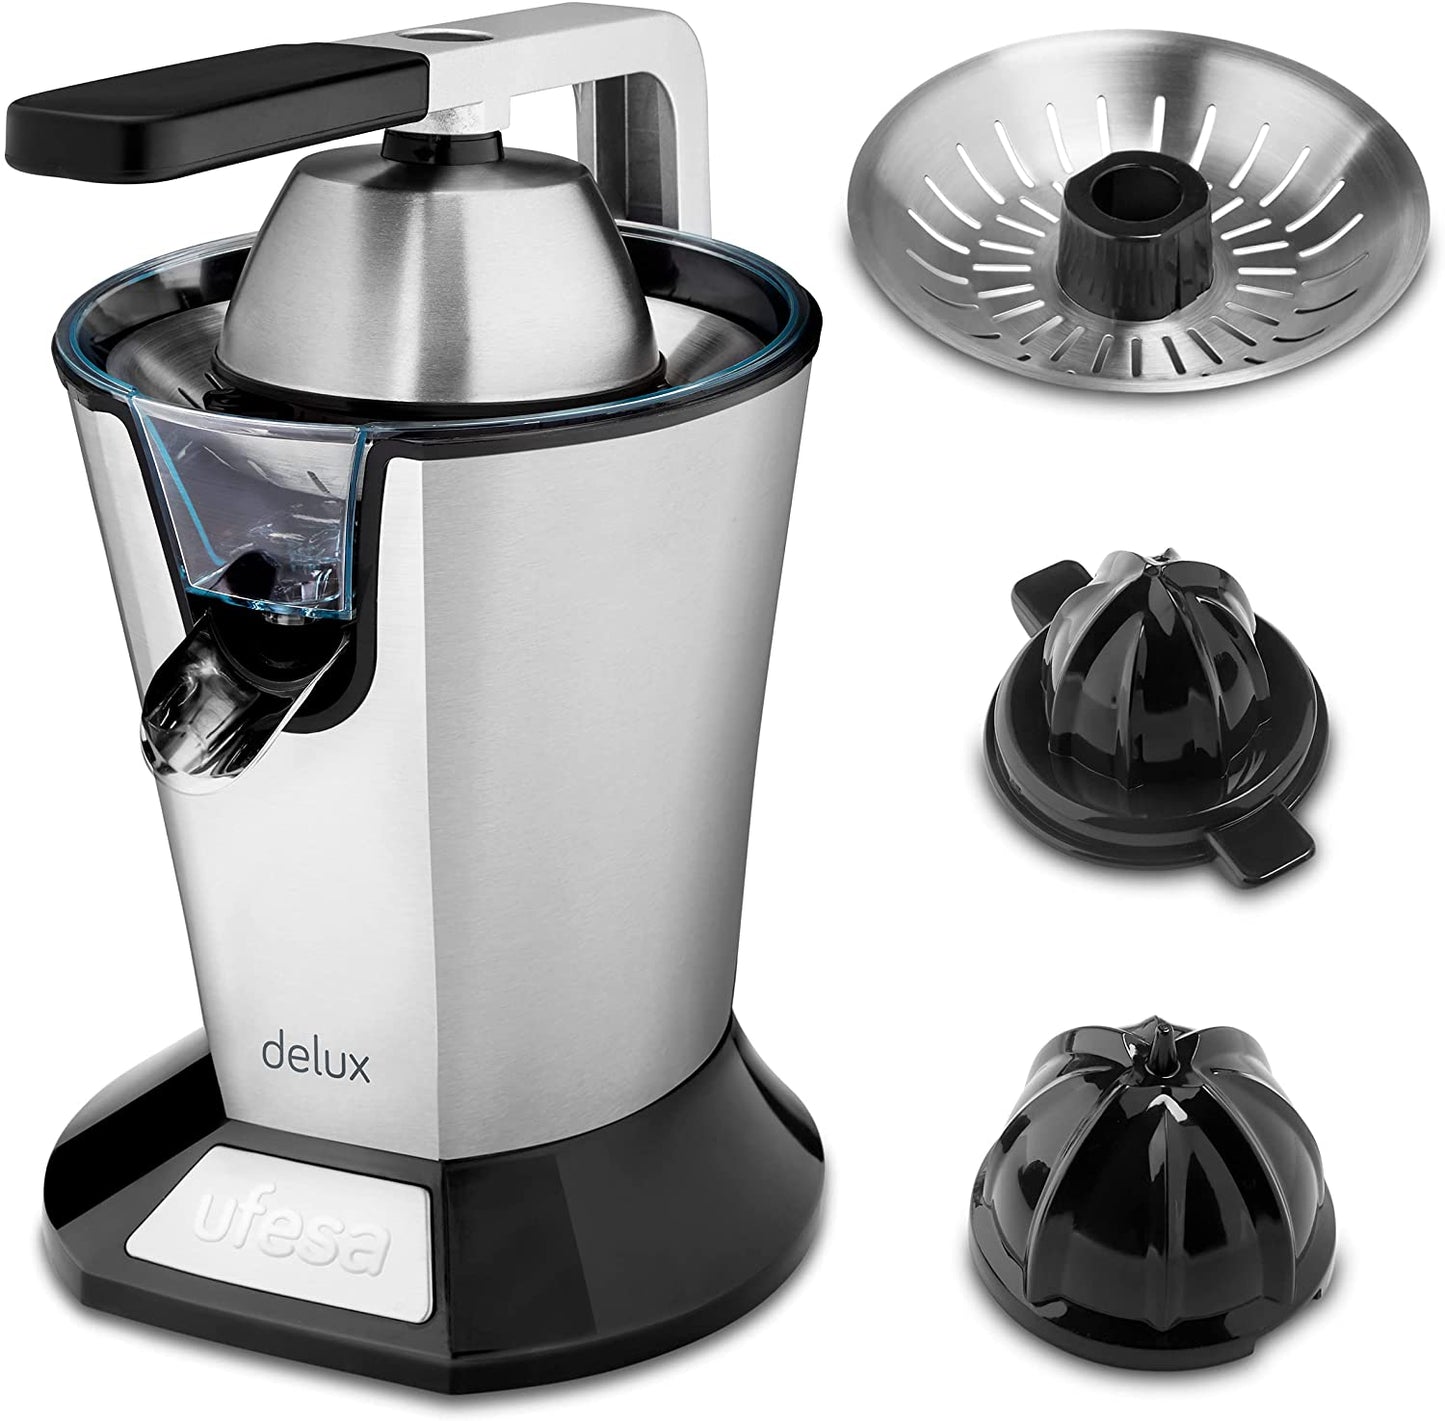 UFESA EX4950 Lever Press Juicer 600W Inox Different squeezer cones for Large & Small fruits